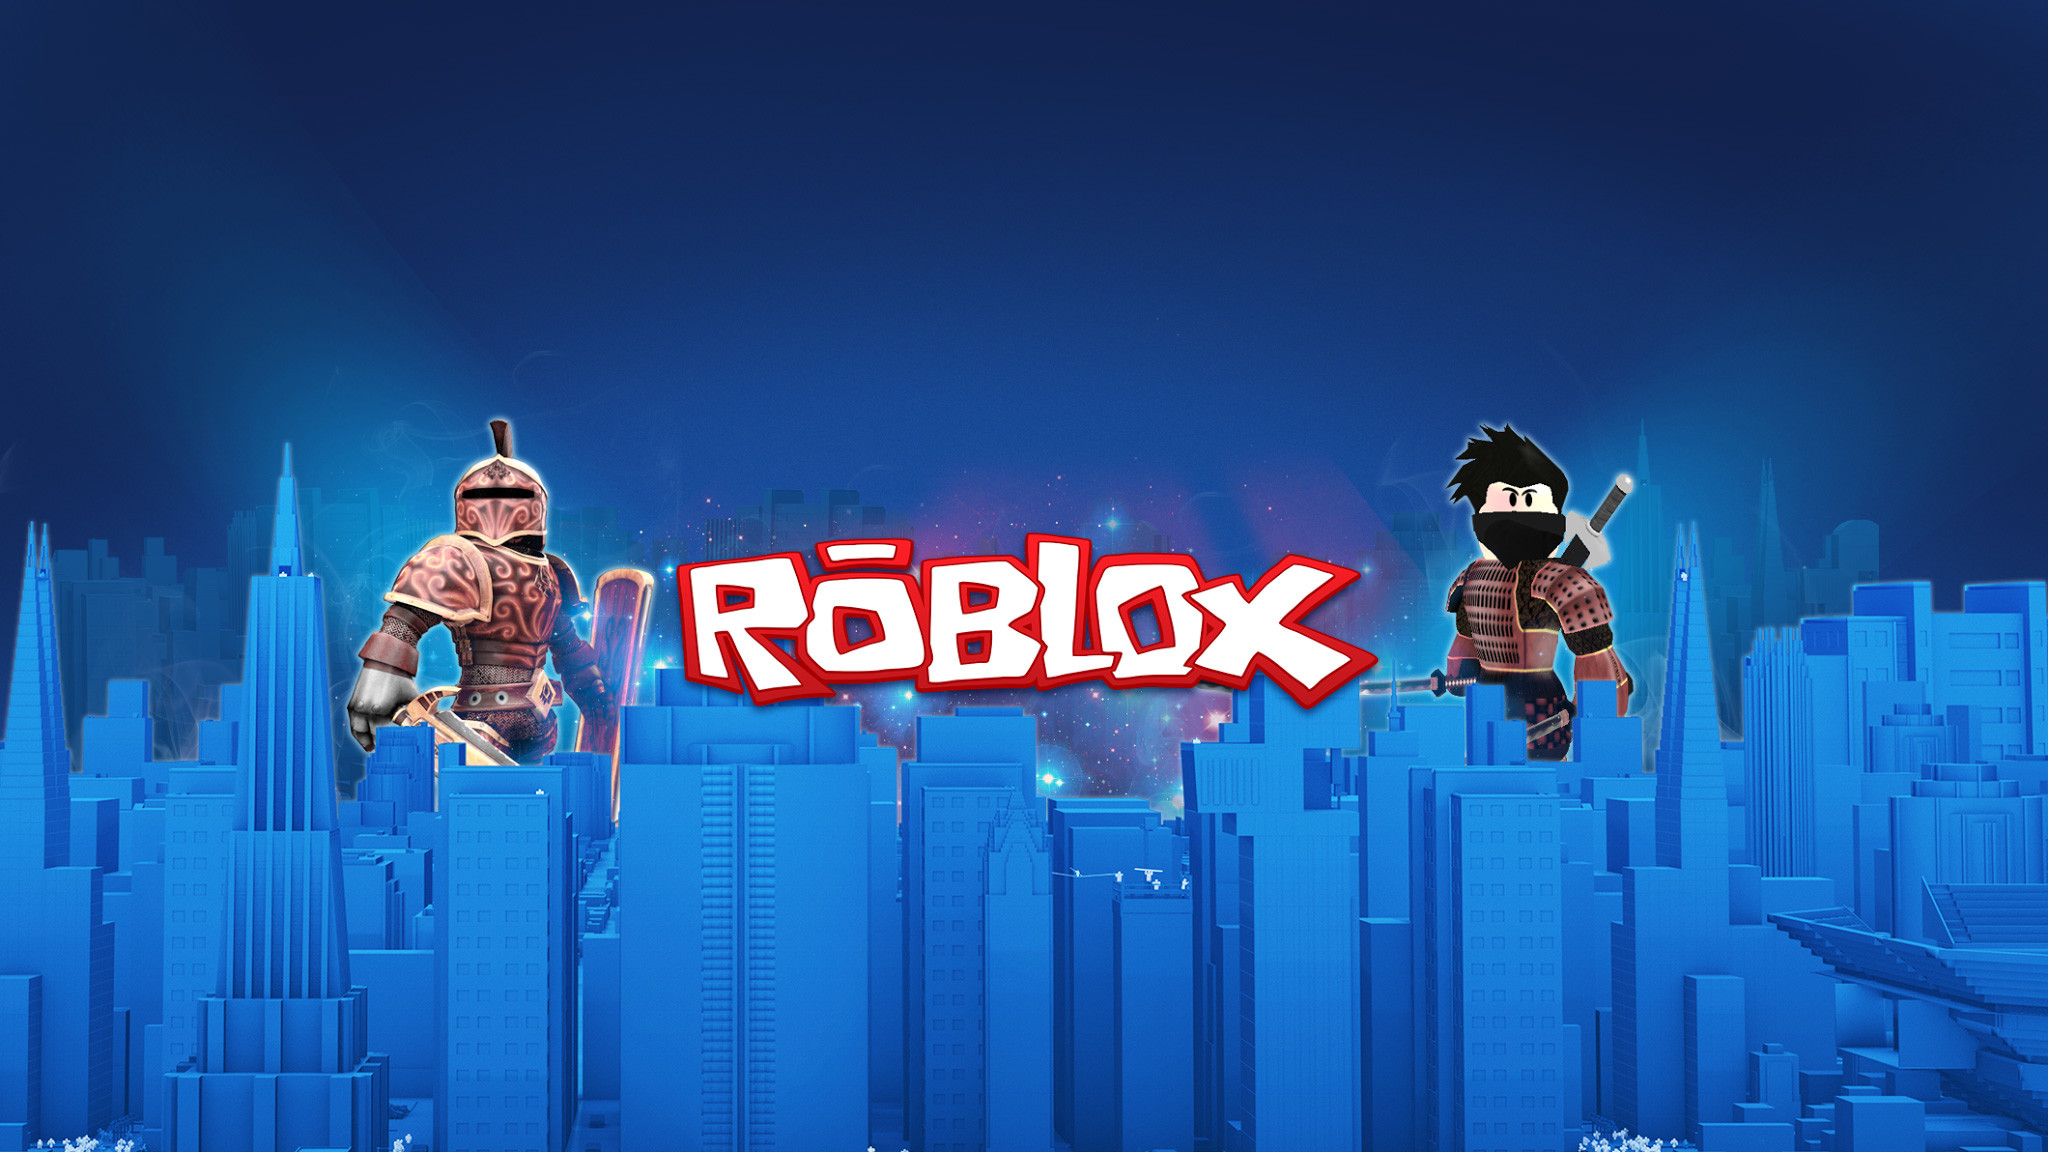 Download Roblox Theme for Windows 10/11 